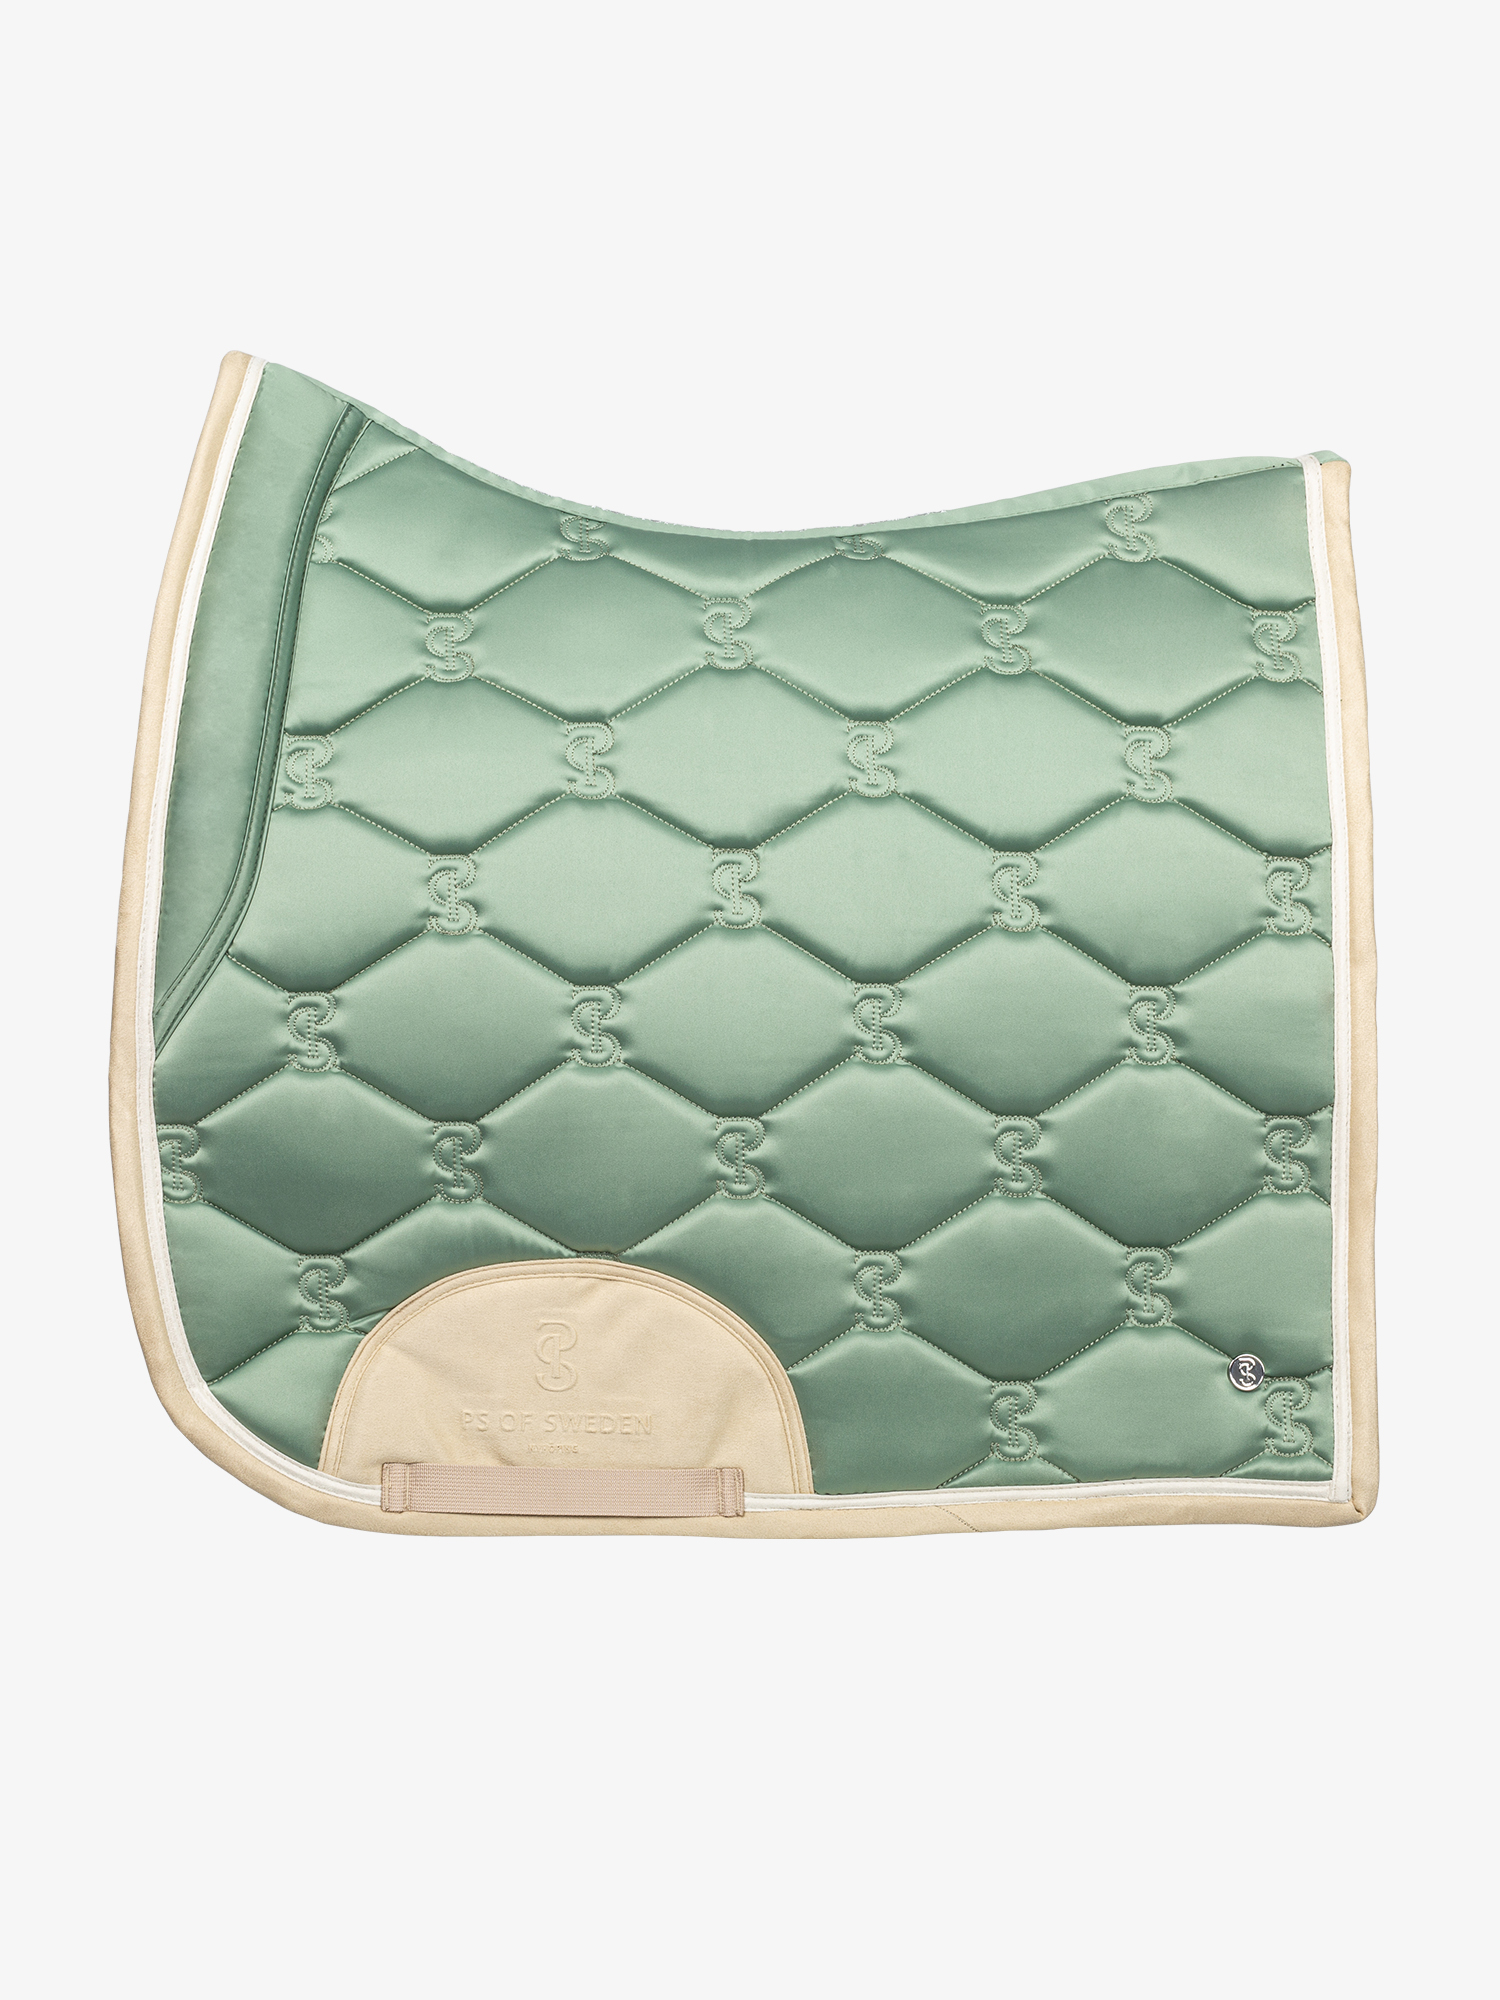 NEW SADDLE SHAPED SADDLE PAD GREEN QUILTED SALE GREEN FULL 